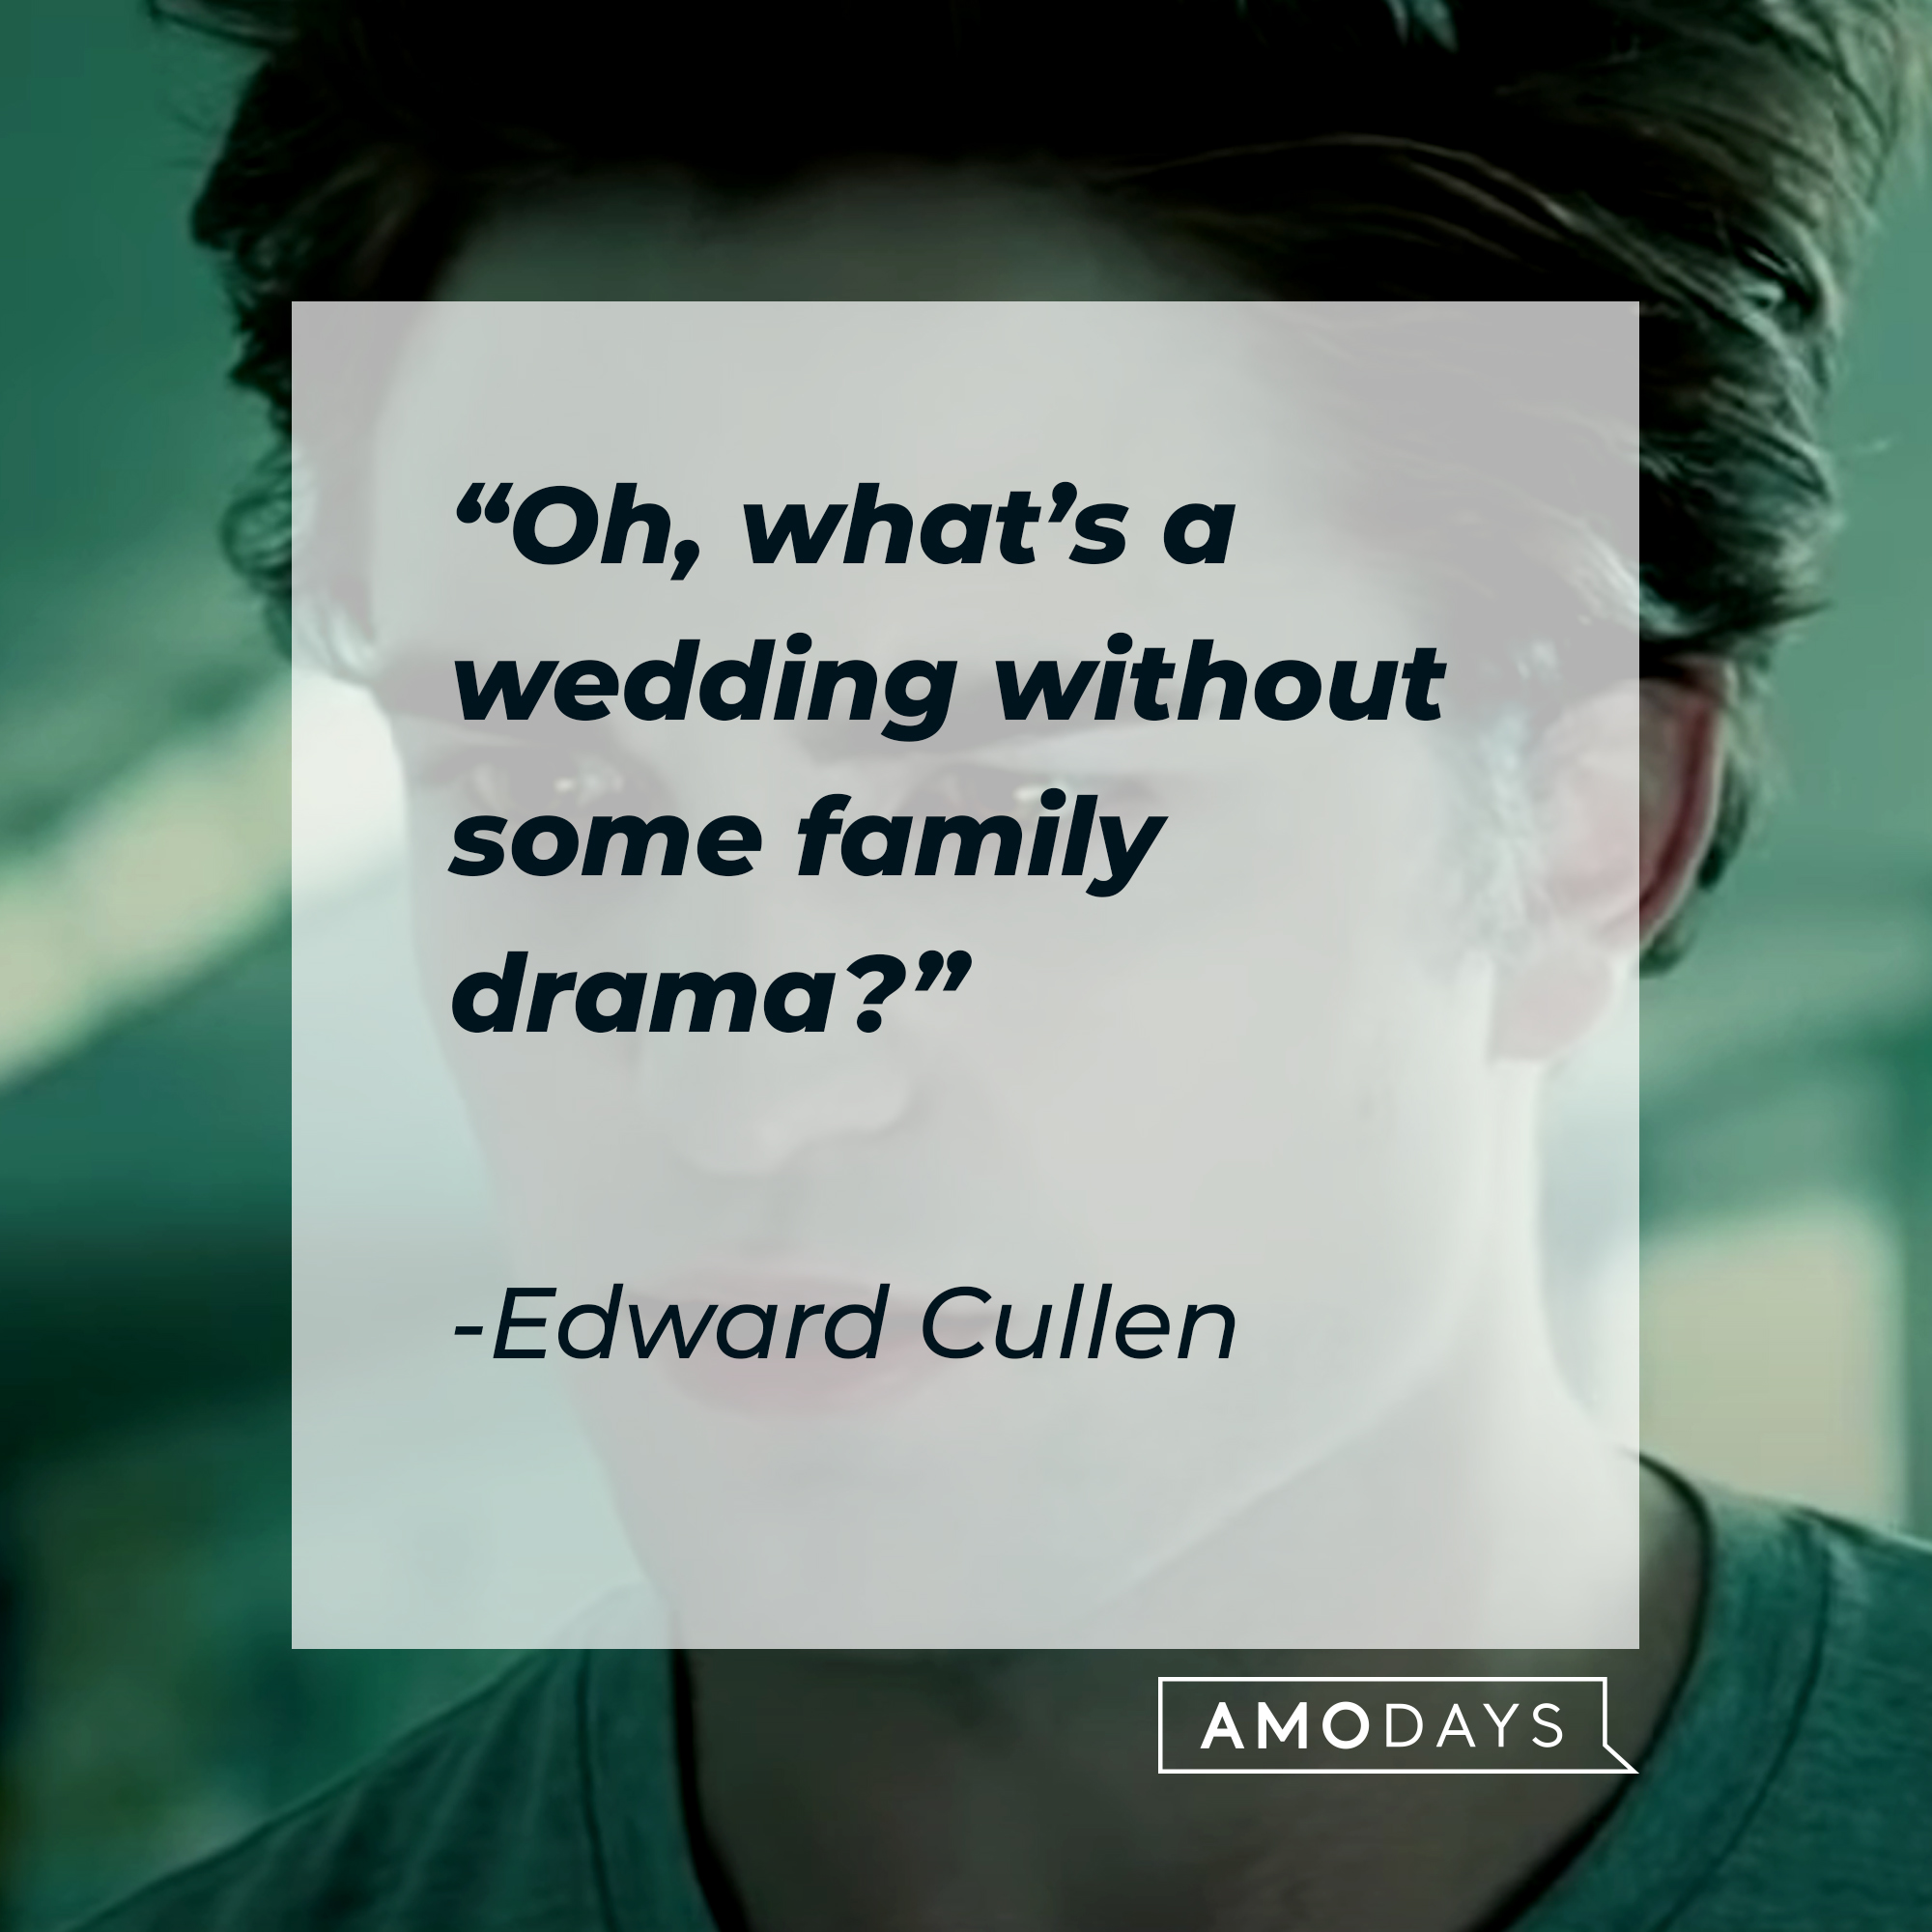 Edward Cullen's quote: "Oh, what’s a wedding without some family drama?” | Source: facebook.com/twilight